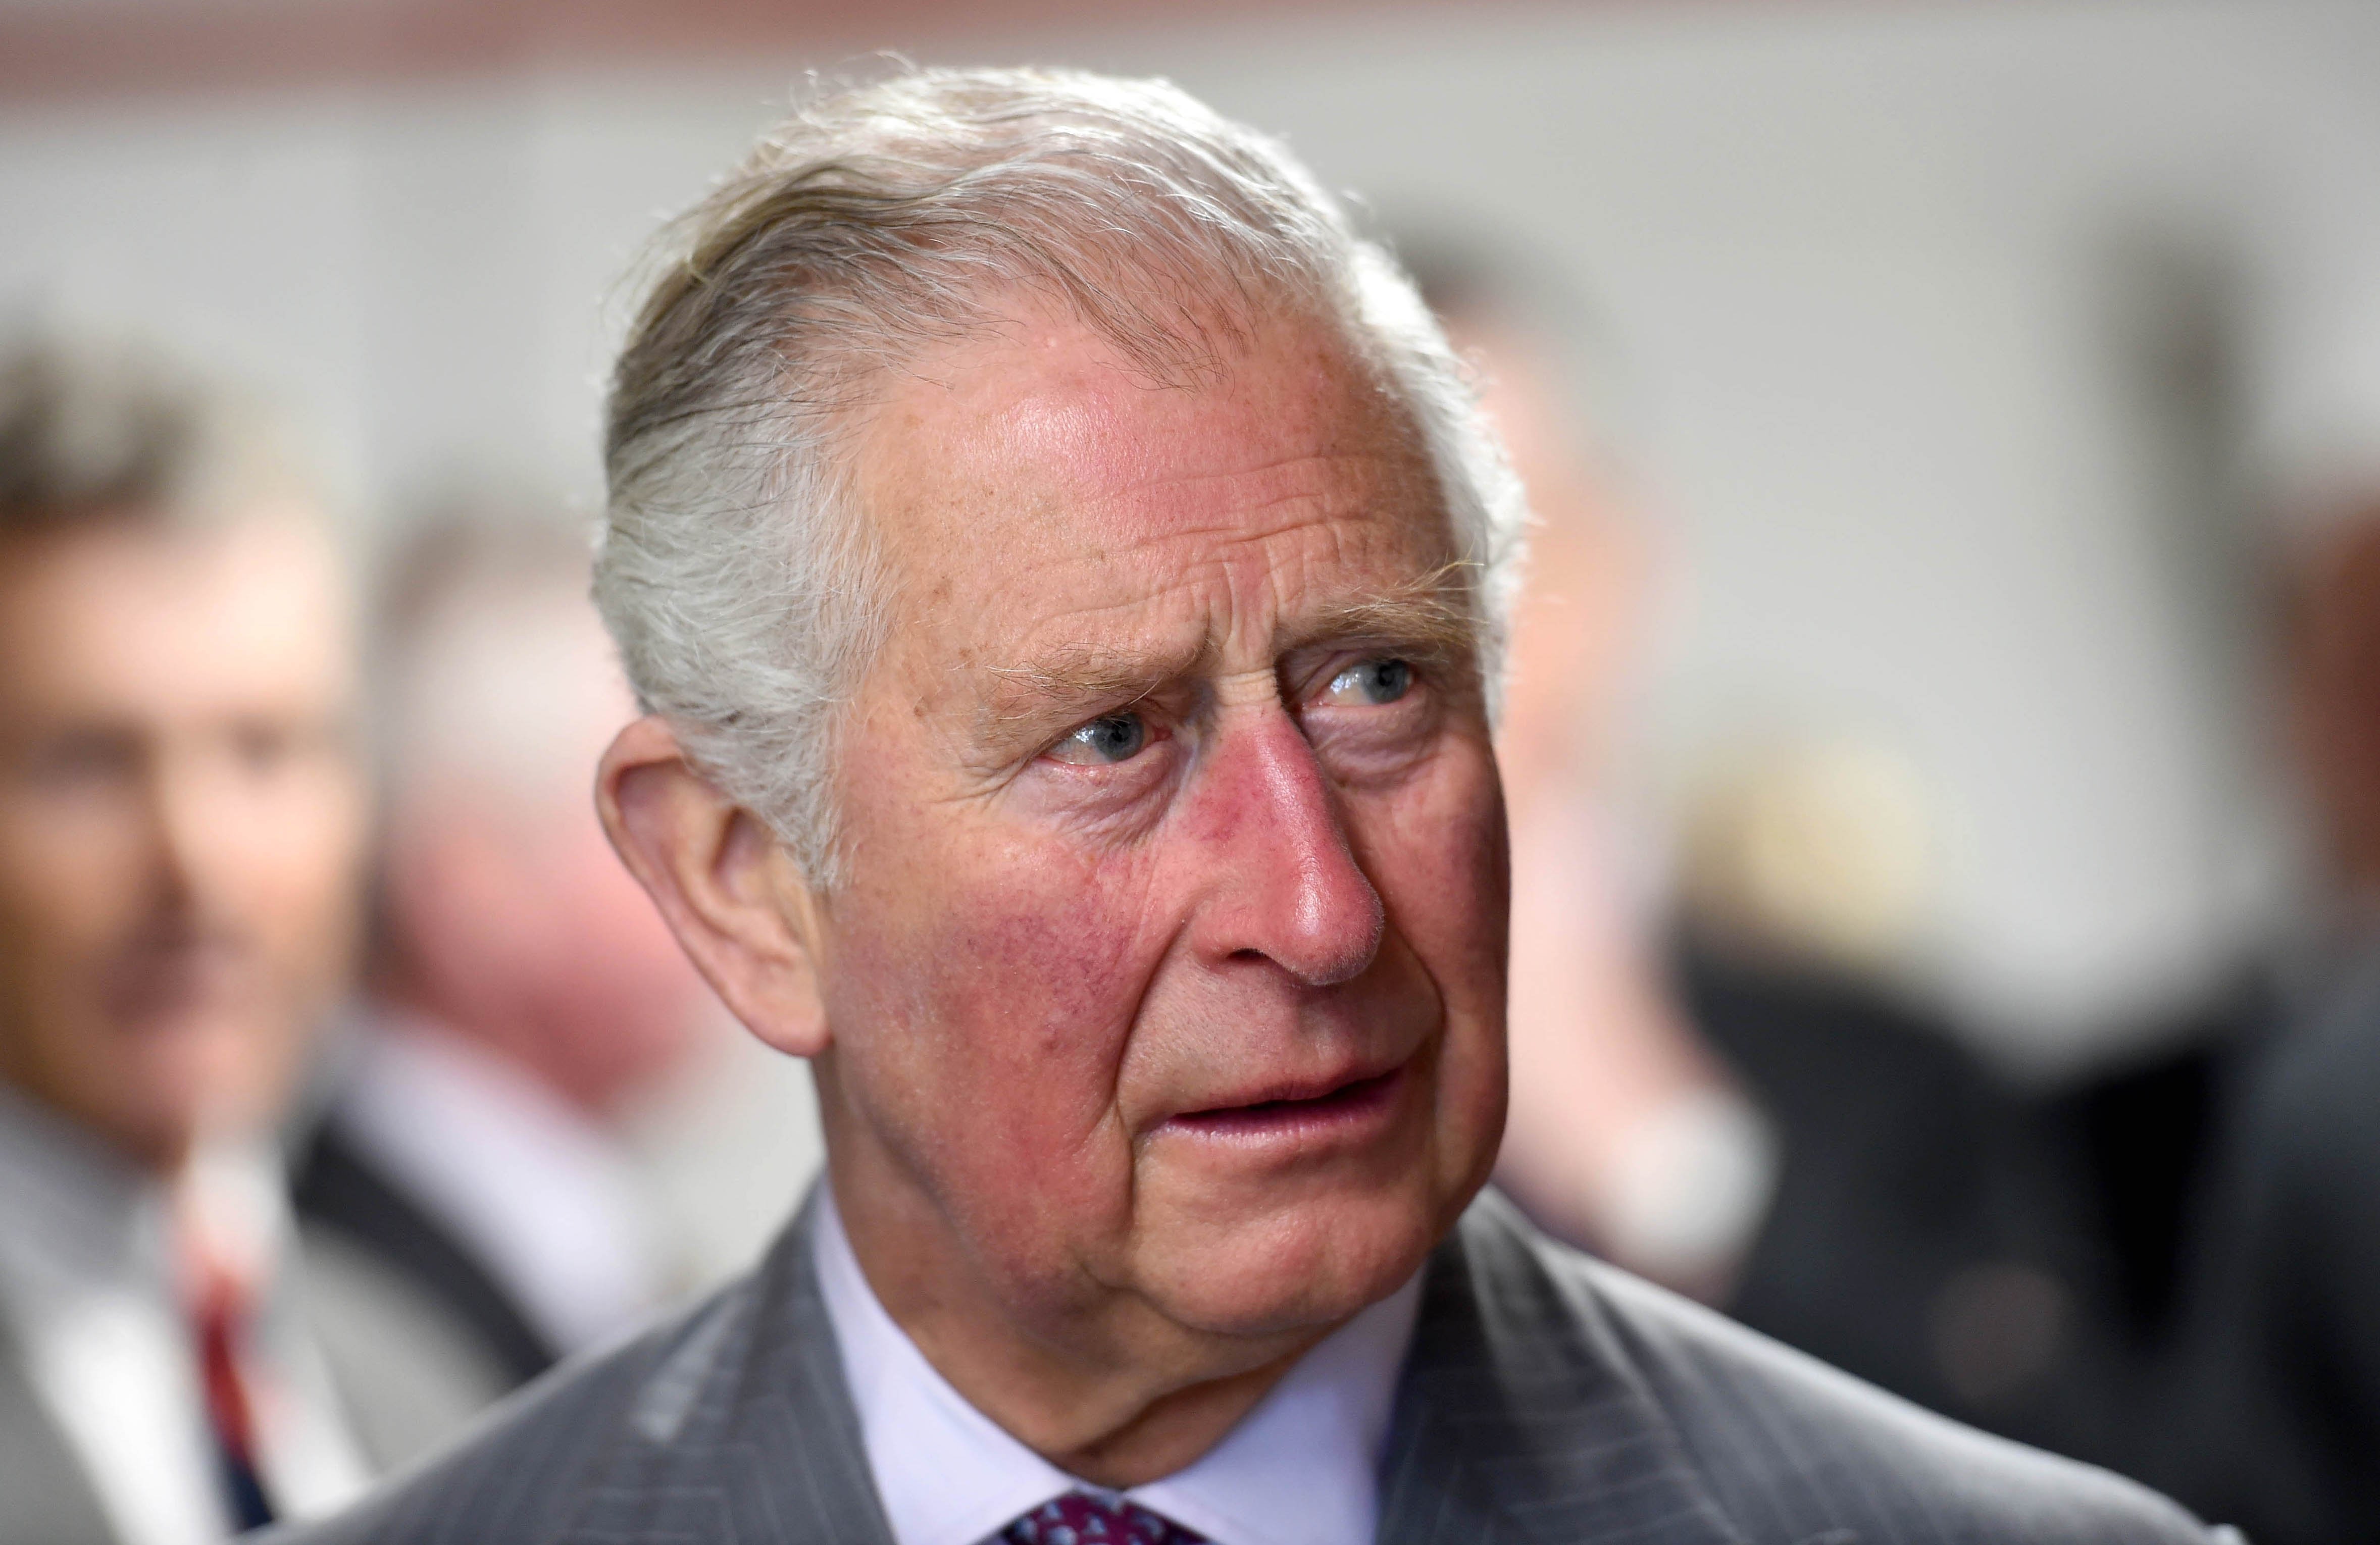 Prince Charles, Prince of Wales makes an official visit to St Austell Brewery on April 05, 2019, in St Austell, England. | Source: Getty Images.